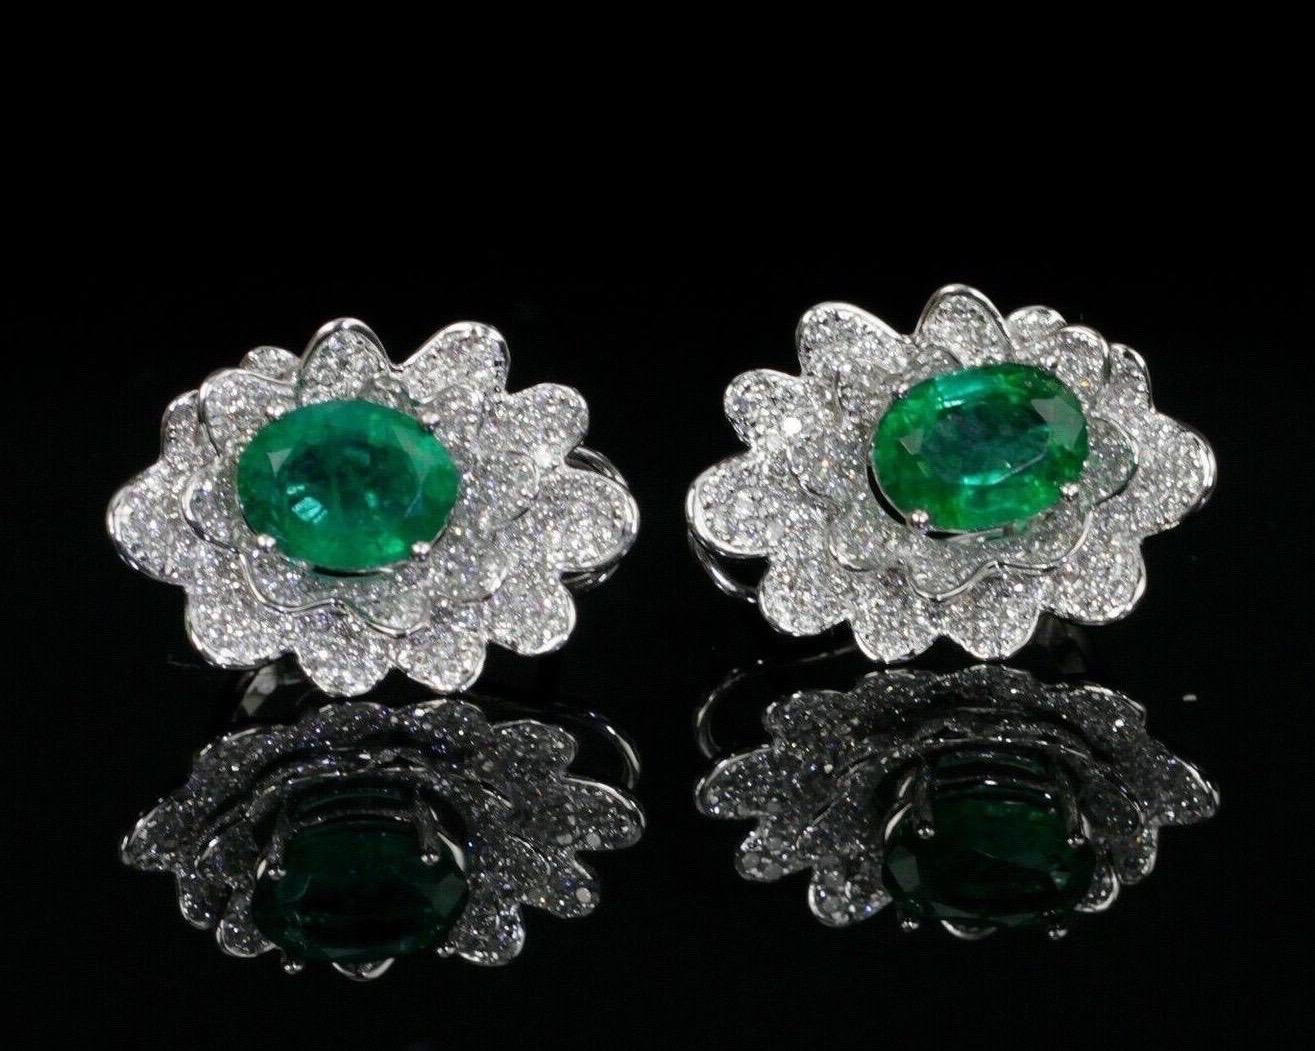 Cast in 14 karat white gold, these stunning stud earrings are hand set with 3.18 carats emerald and 1.37 carats of glimmering diamonds. 

FOLLOW MEGHNA JEWELS storefront to view the latest collection & exclusive pieces. Meghna Jewels is proudly